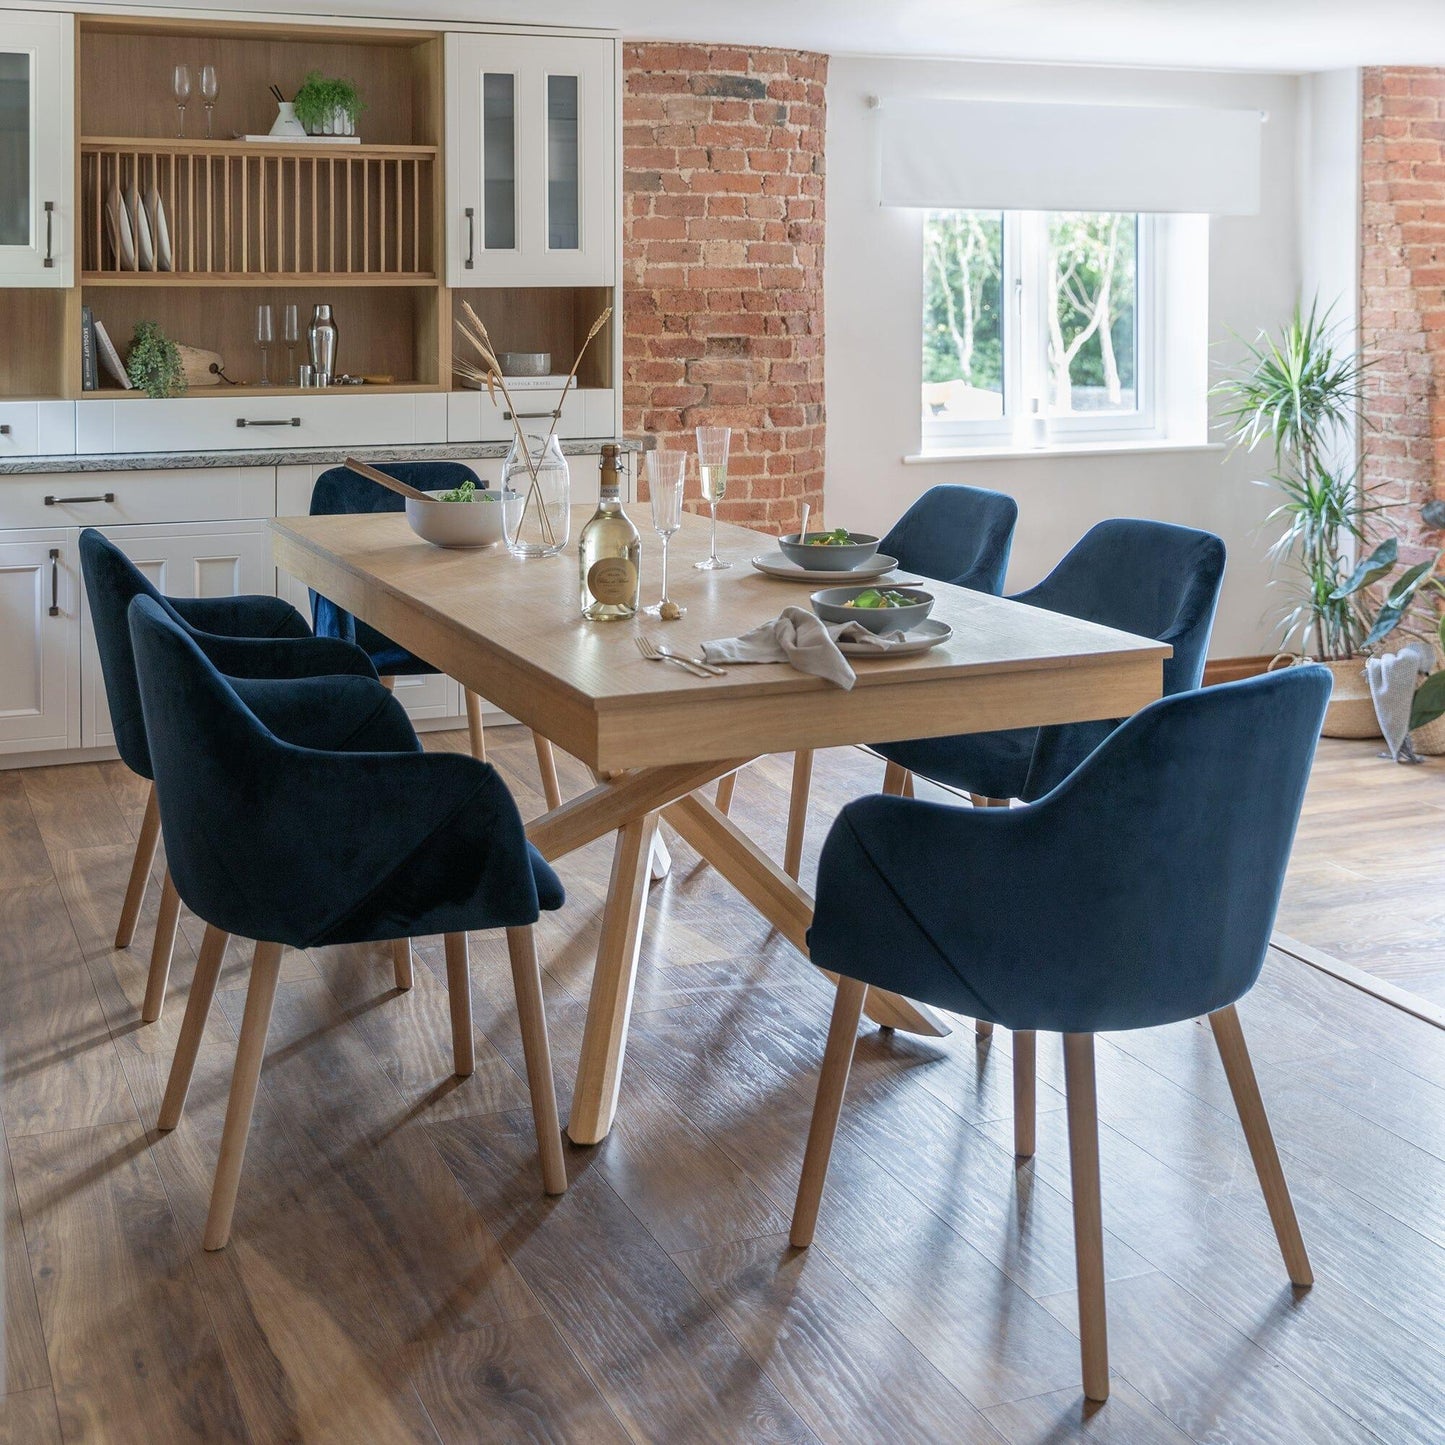 Amelia Whitewash Dining Table Set - 6 Seater - Freya Blue Carver Chairs With Oak Legs - Laura James